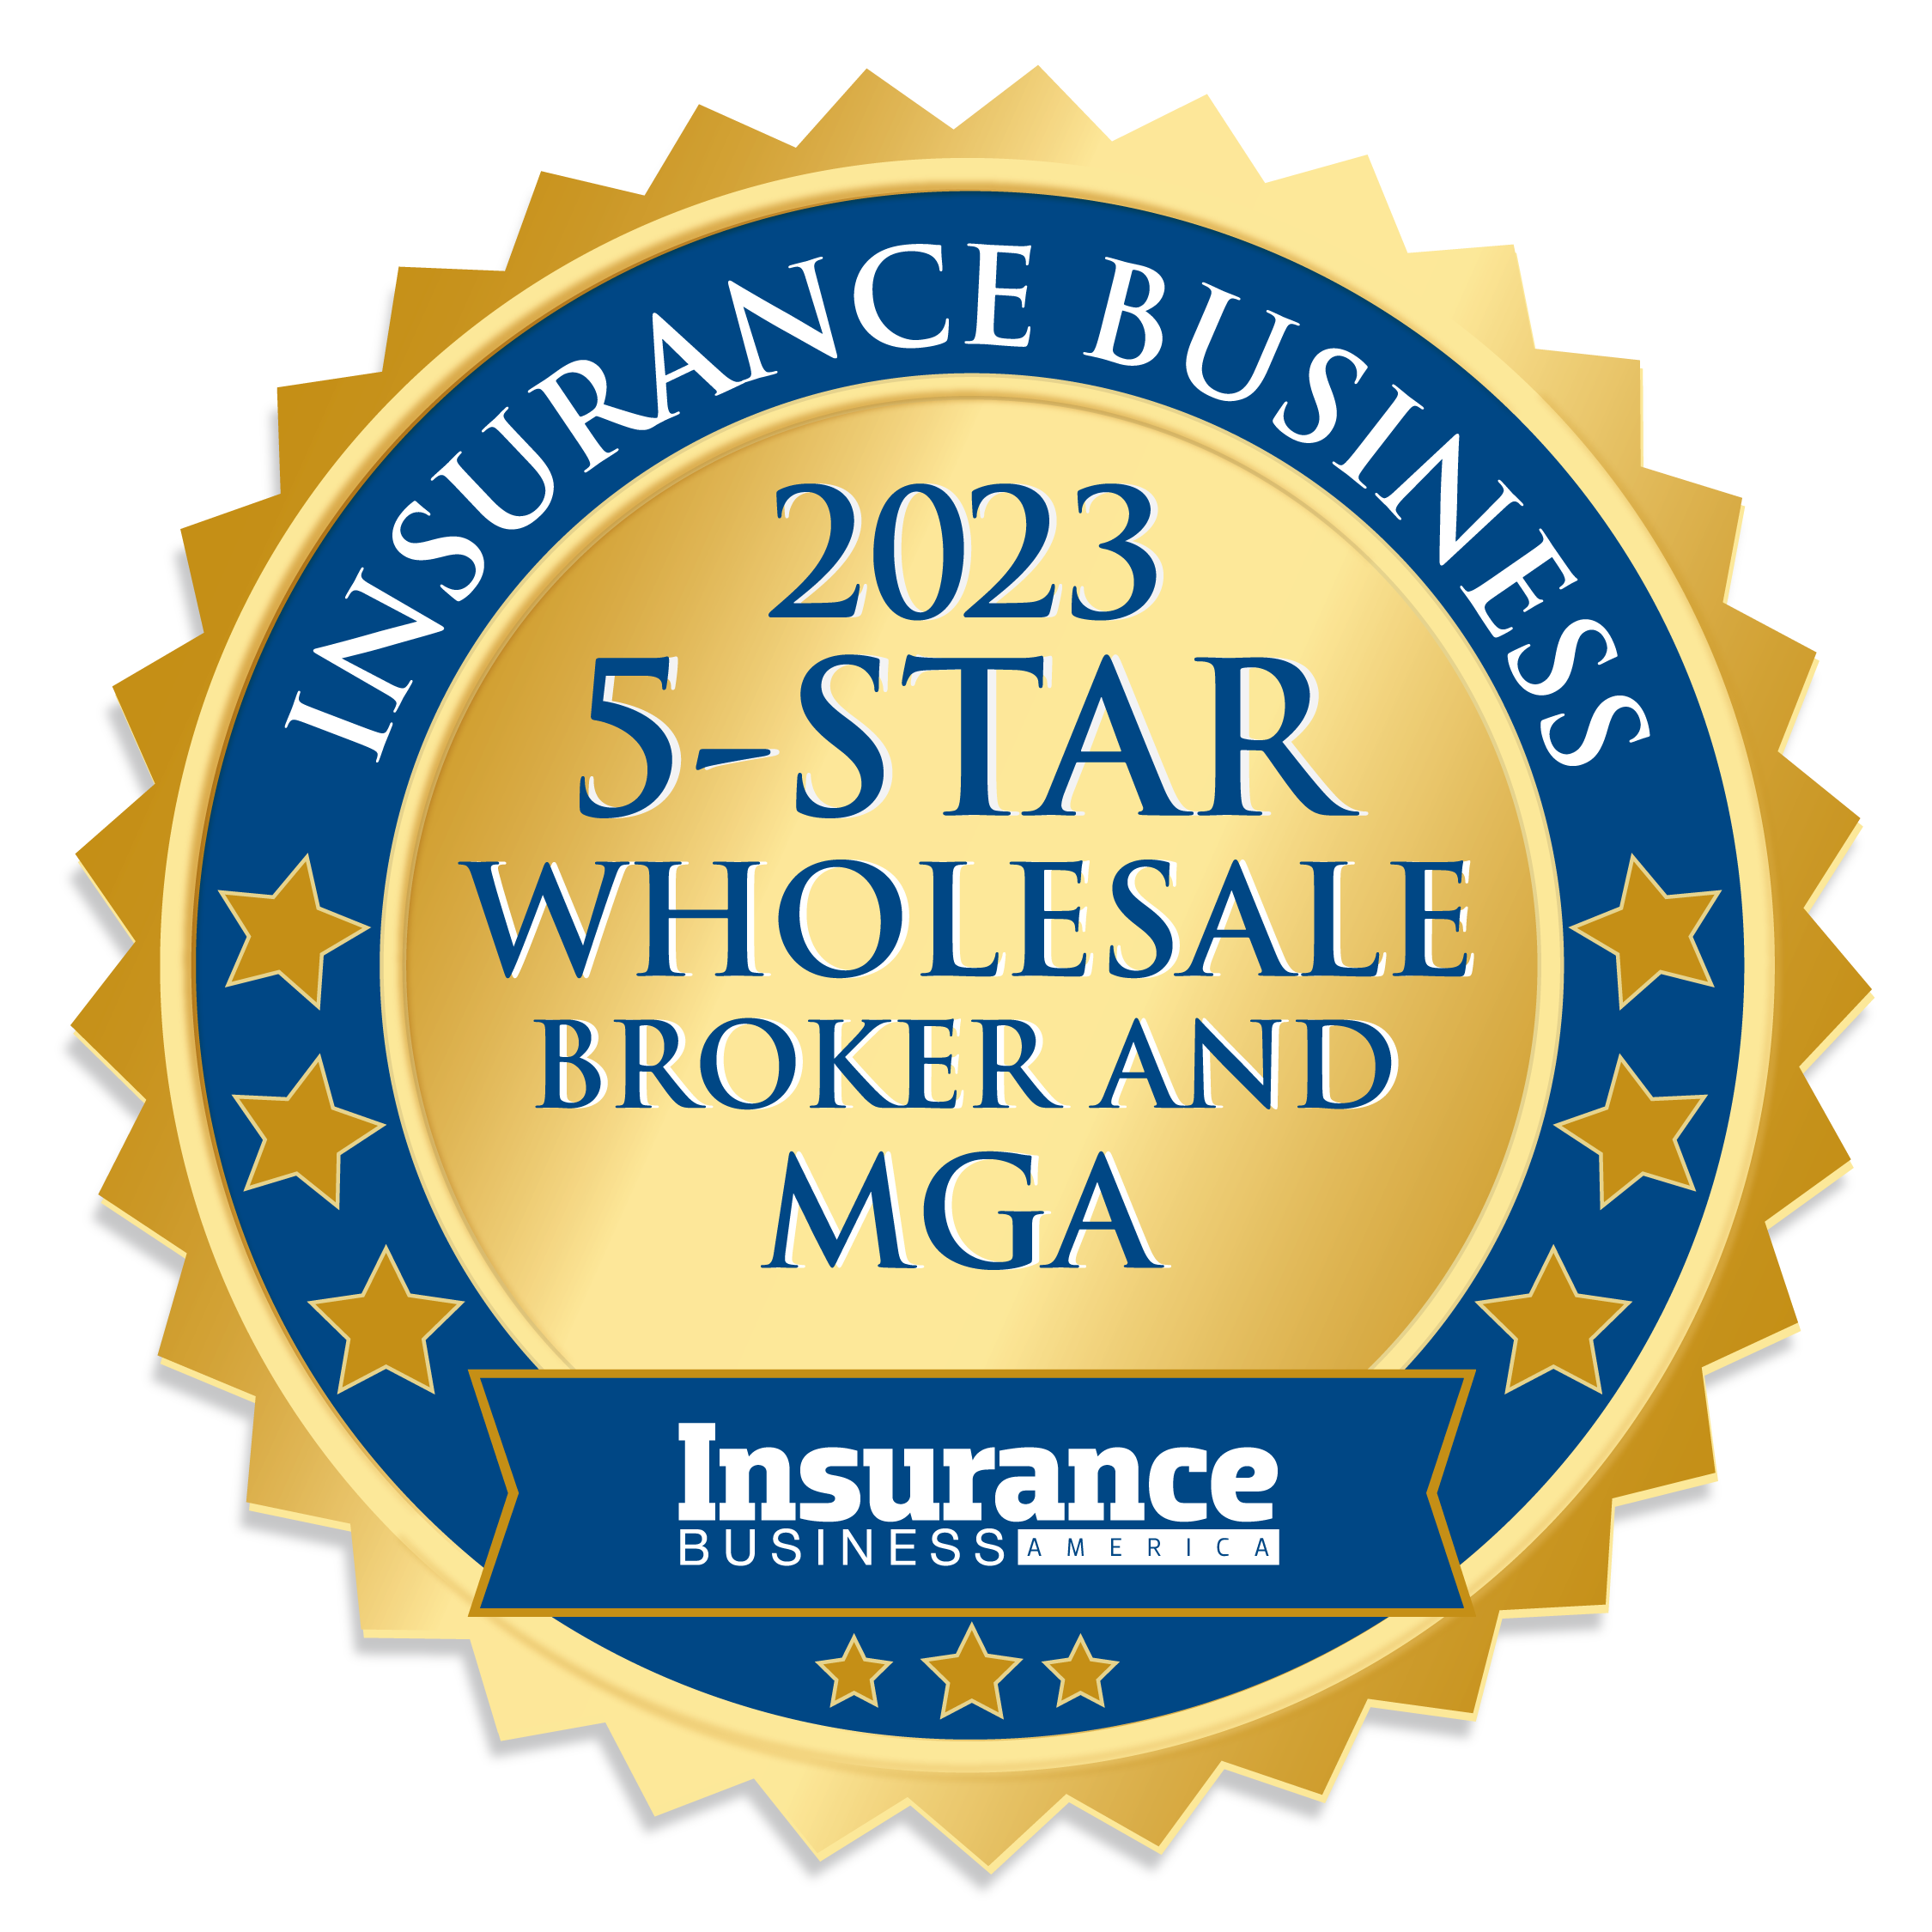 https://premium.insurancebusinessmag.com/us-iba-5-star-wholesale-brokers-and-mgas-2023-rt-specialty/p/1